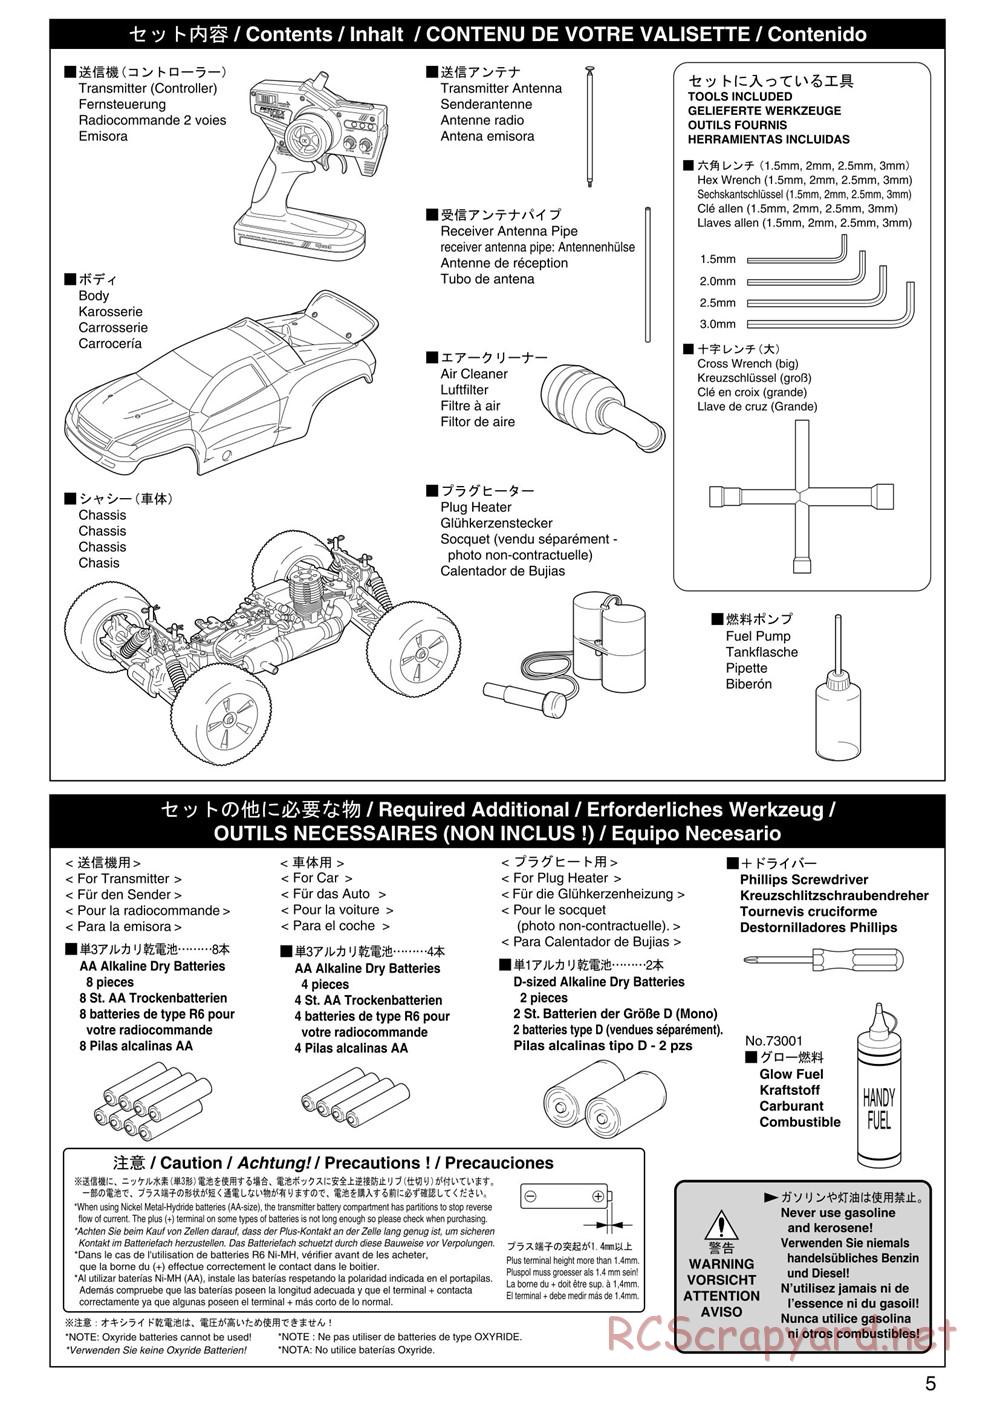 Kyosho - Inferno ST (2005) - Manual - Page 5